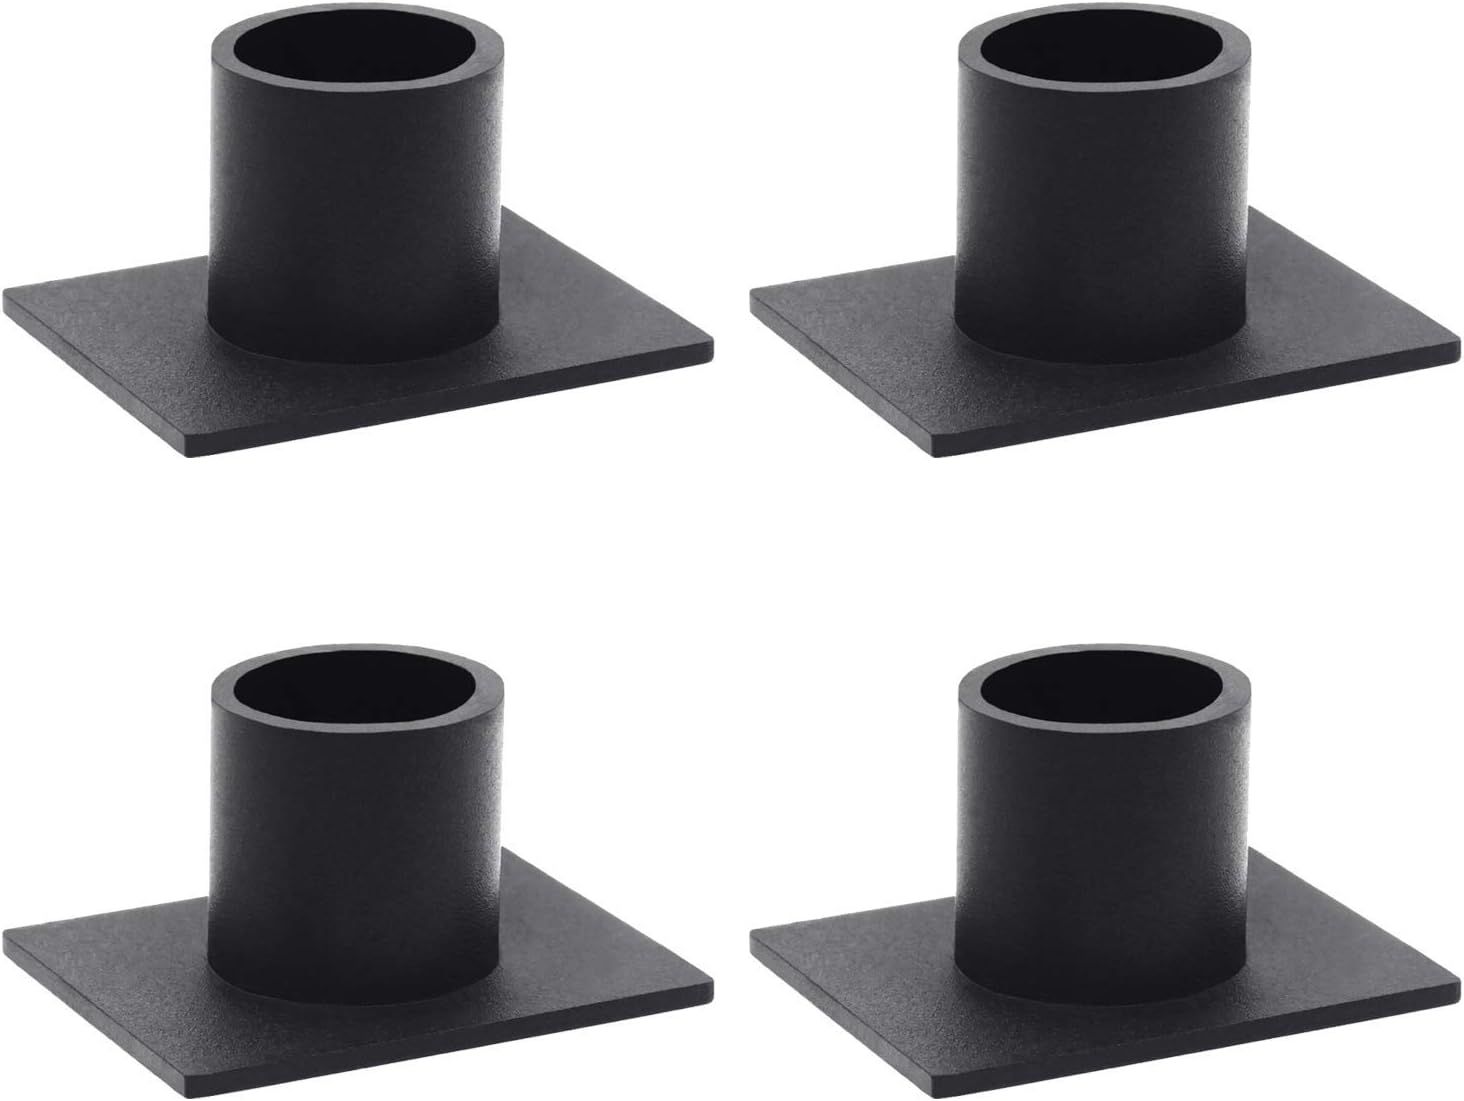 HUANGXIN Black Taper Pillar Candle Holders, Set of 4 Candlestick Holder Centerpieces for Home Dec... | Amazon (US)